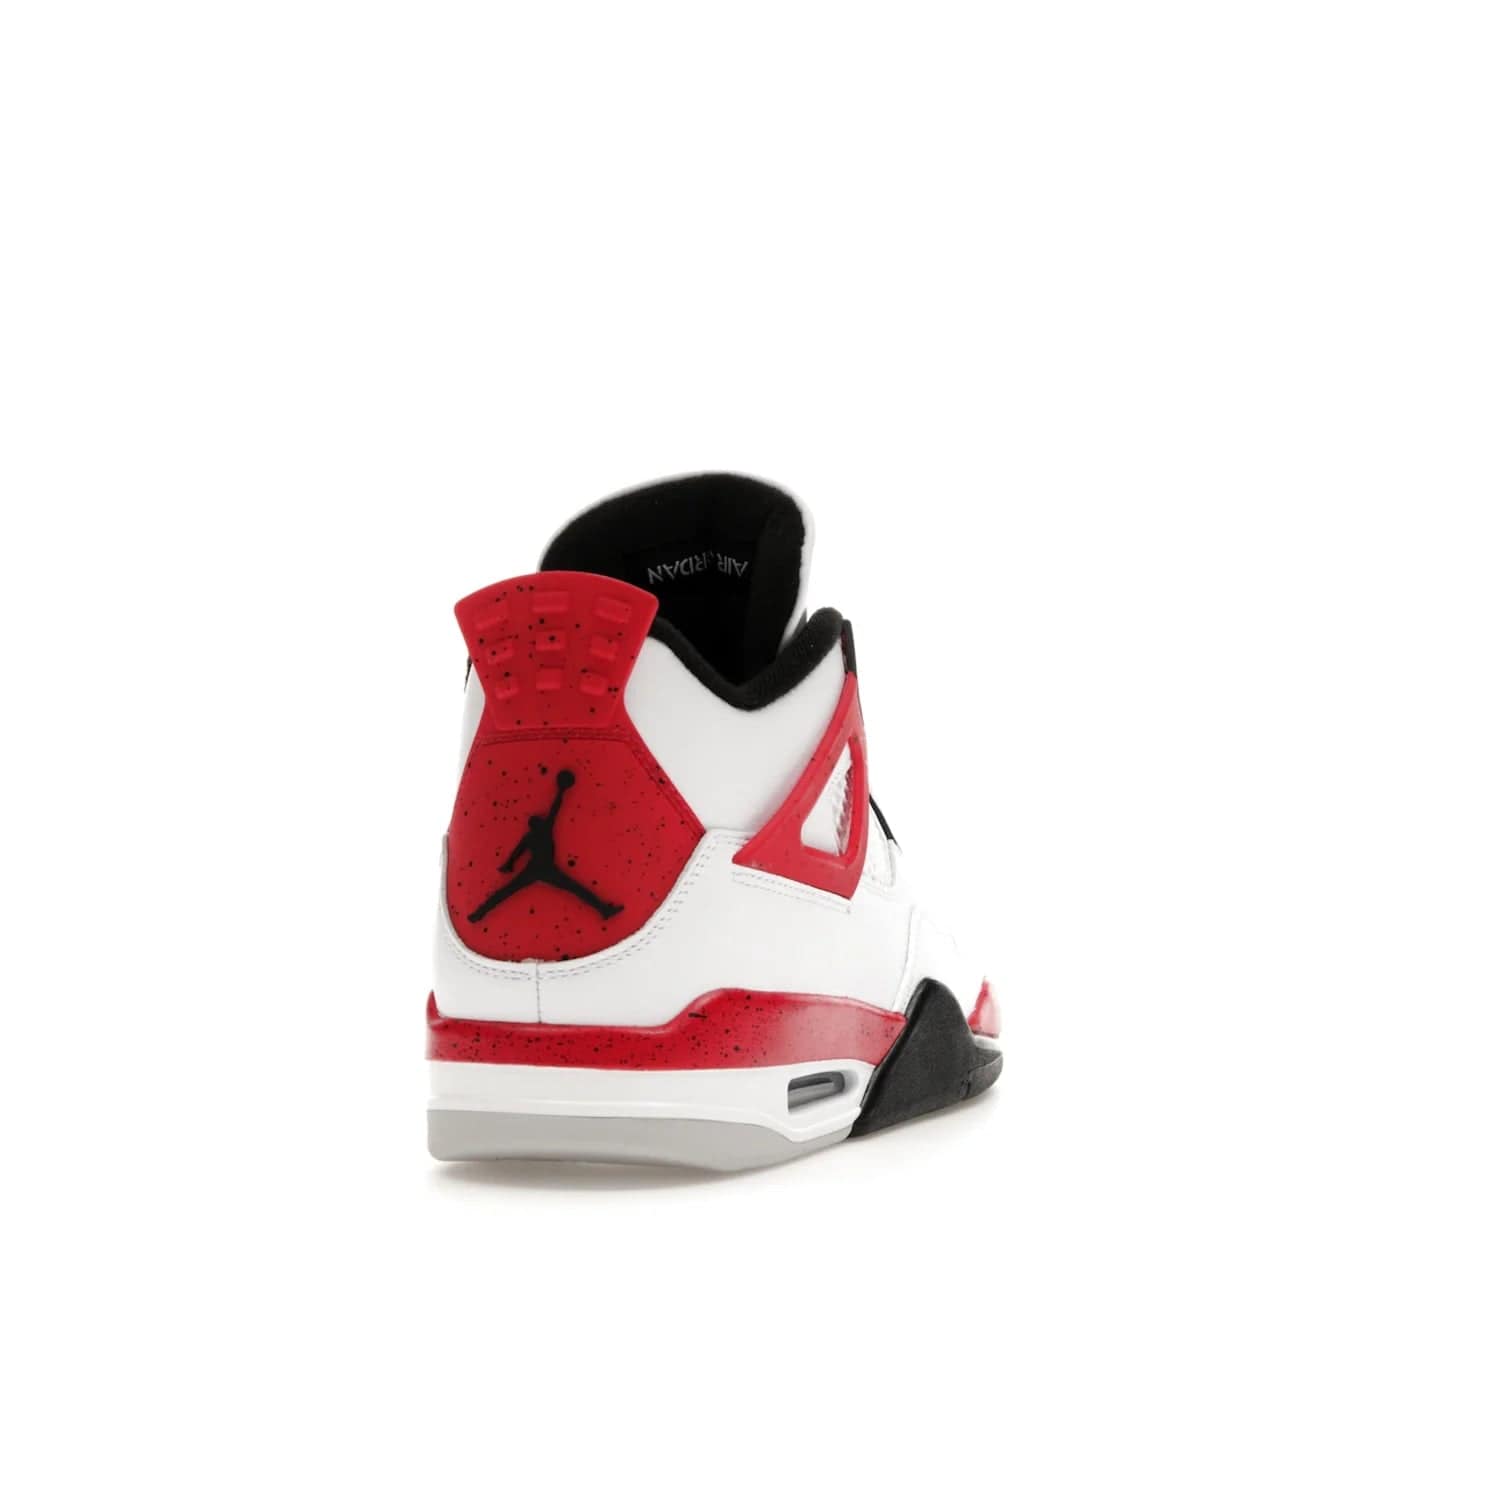 Jordan 4 Retro Red Cement - Image 30 - Only at www.BallersClubKickz.com - Iconic Jordan silhouette with a unique twist. White premium leather uppers with fire red and black detailing. Black, white, and fire red midsole with mesh detailing and Jumpman logo. Jordan 4 Retro Red Cement released with premium price.